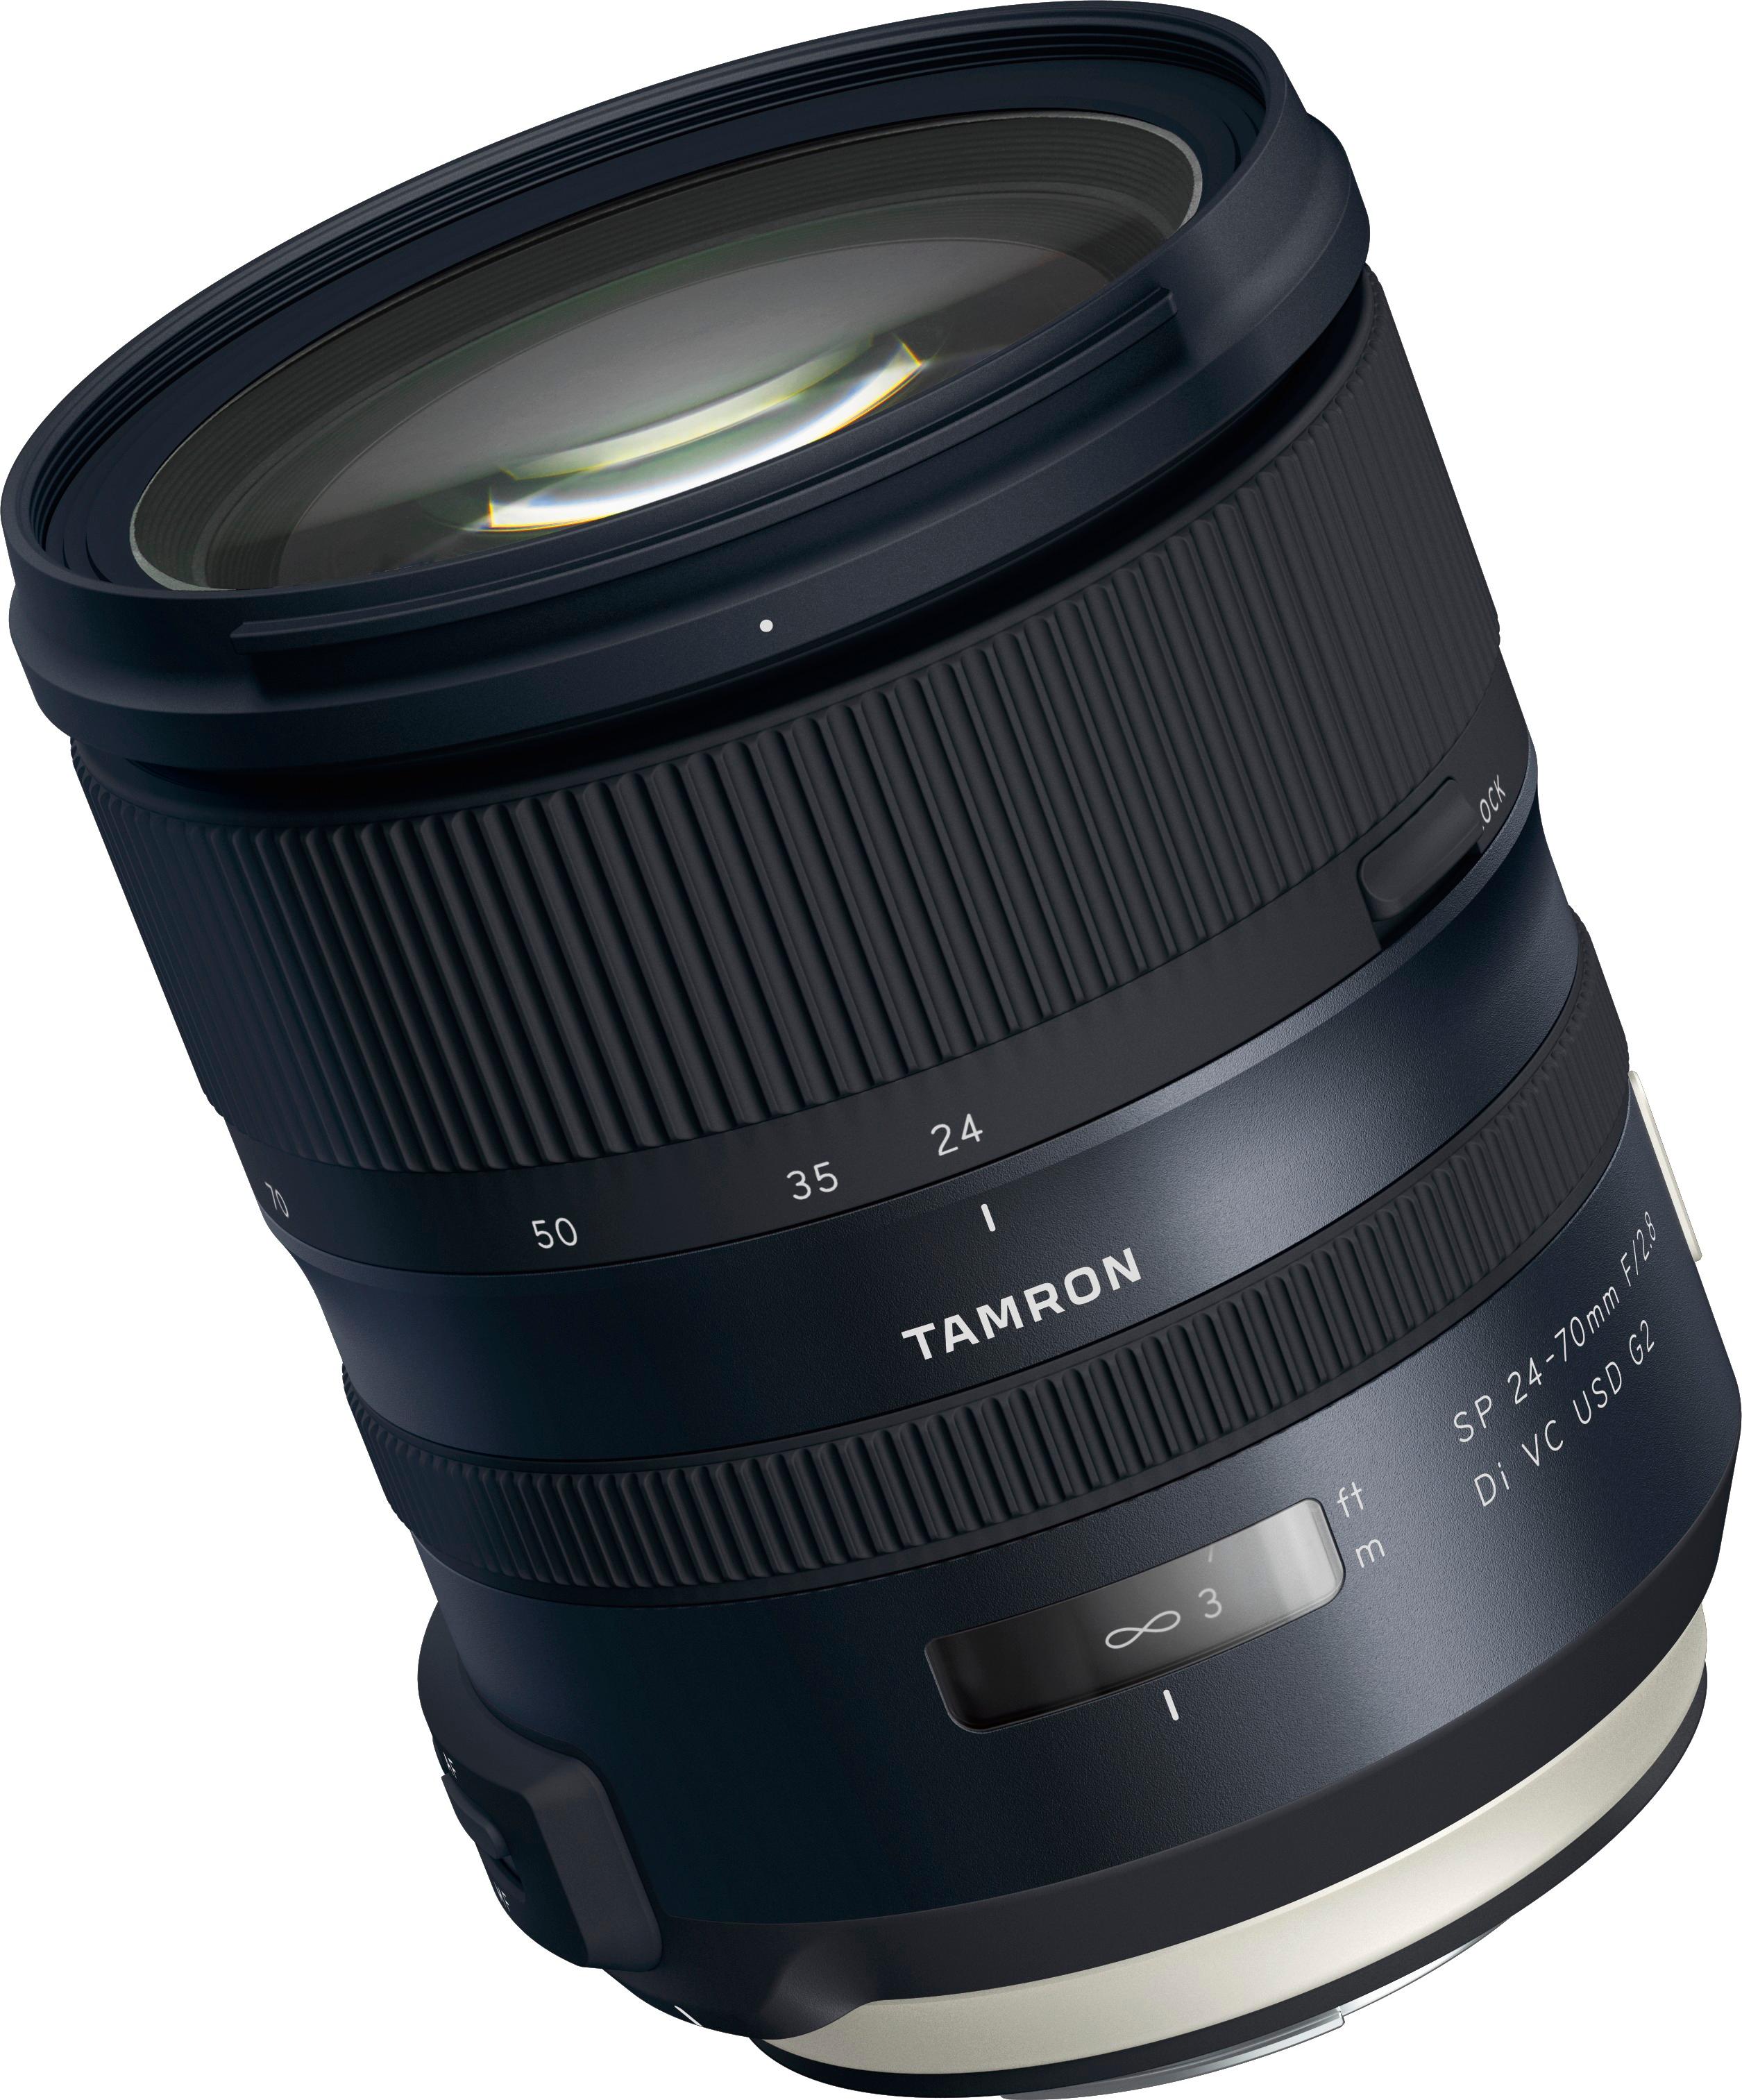 Tamron SP 24-70mm F/2.8 Di VC USD G2 Zoom Lens for Canon DSLR ...